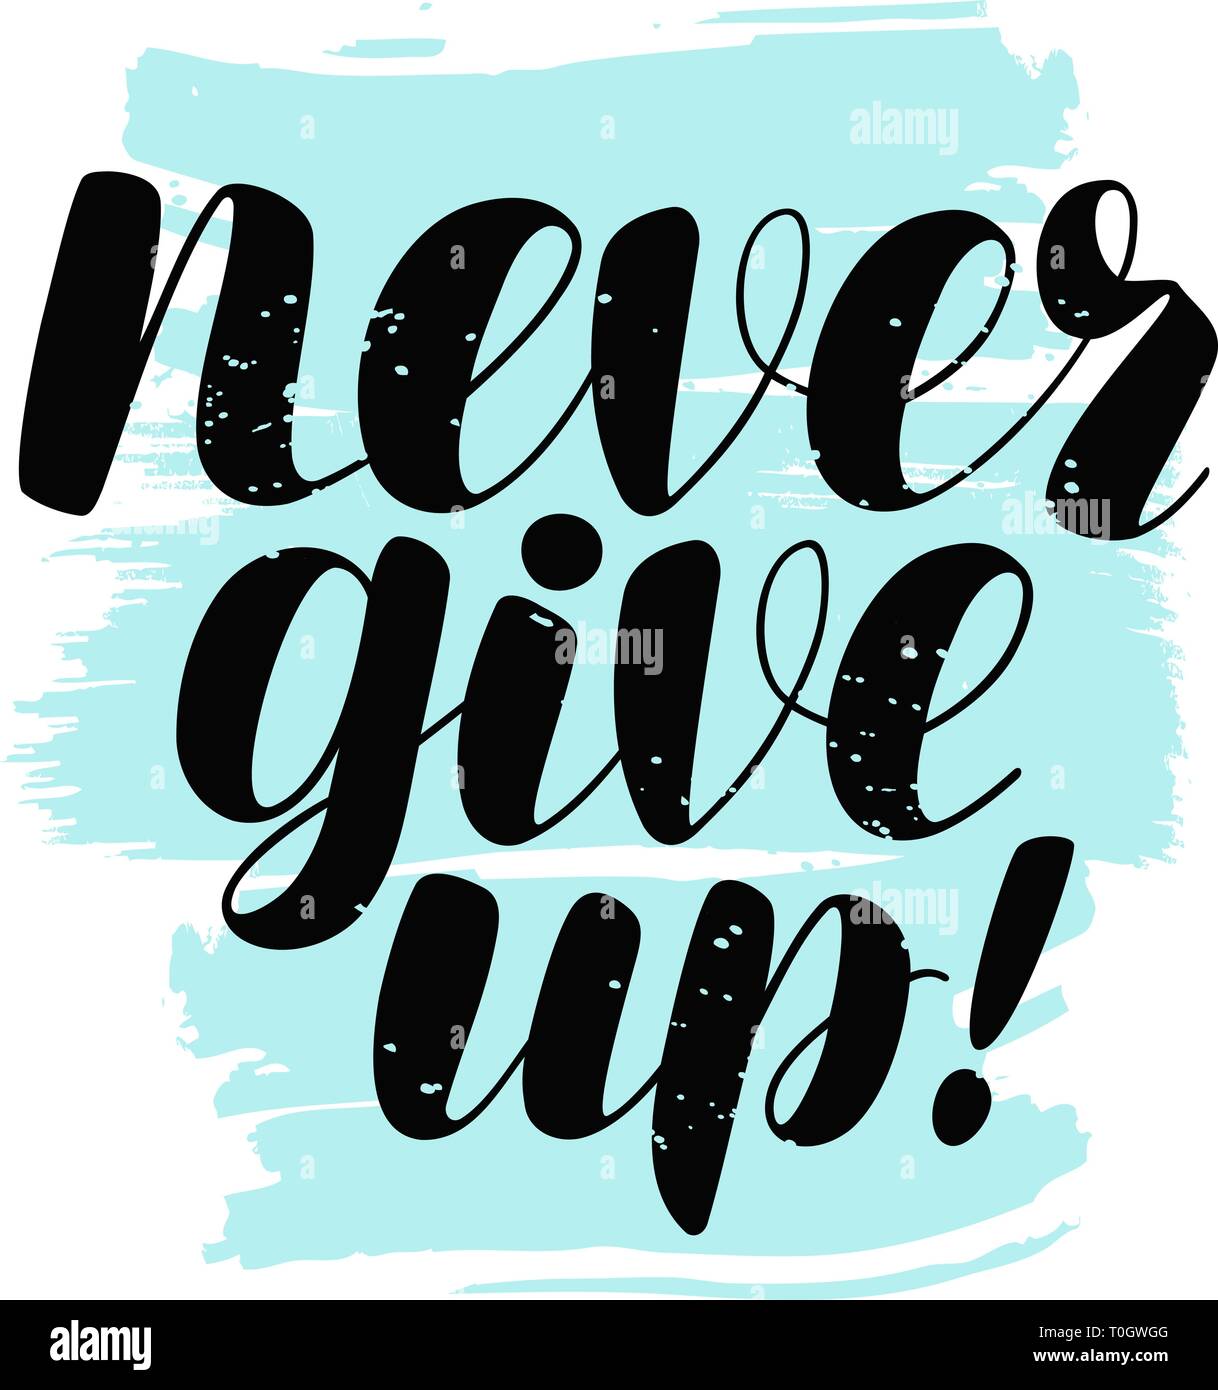 20 Never Give Up Motivation Quotes - Best Inspiring Quotes on